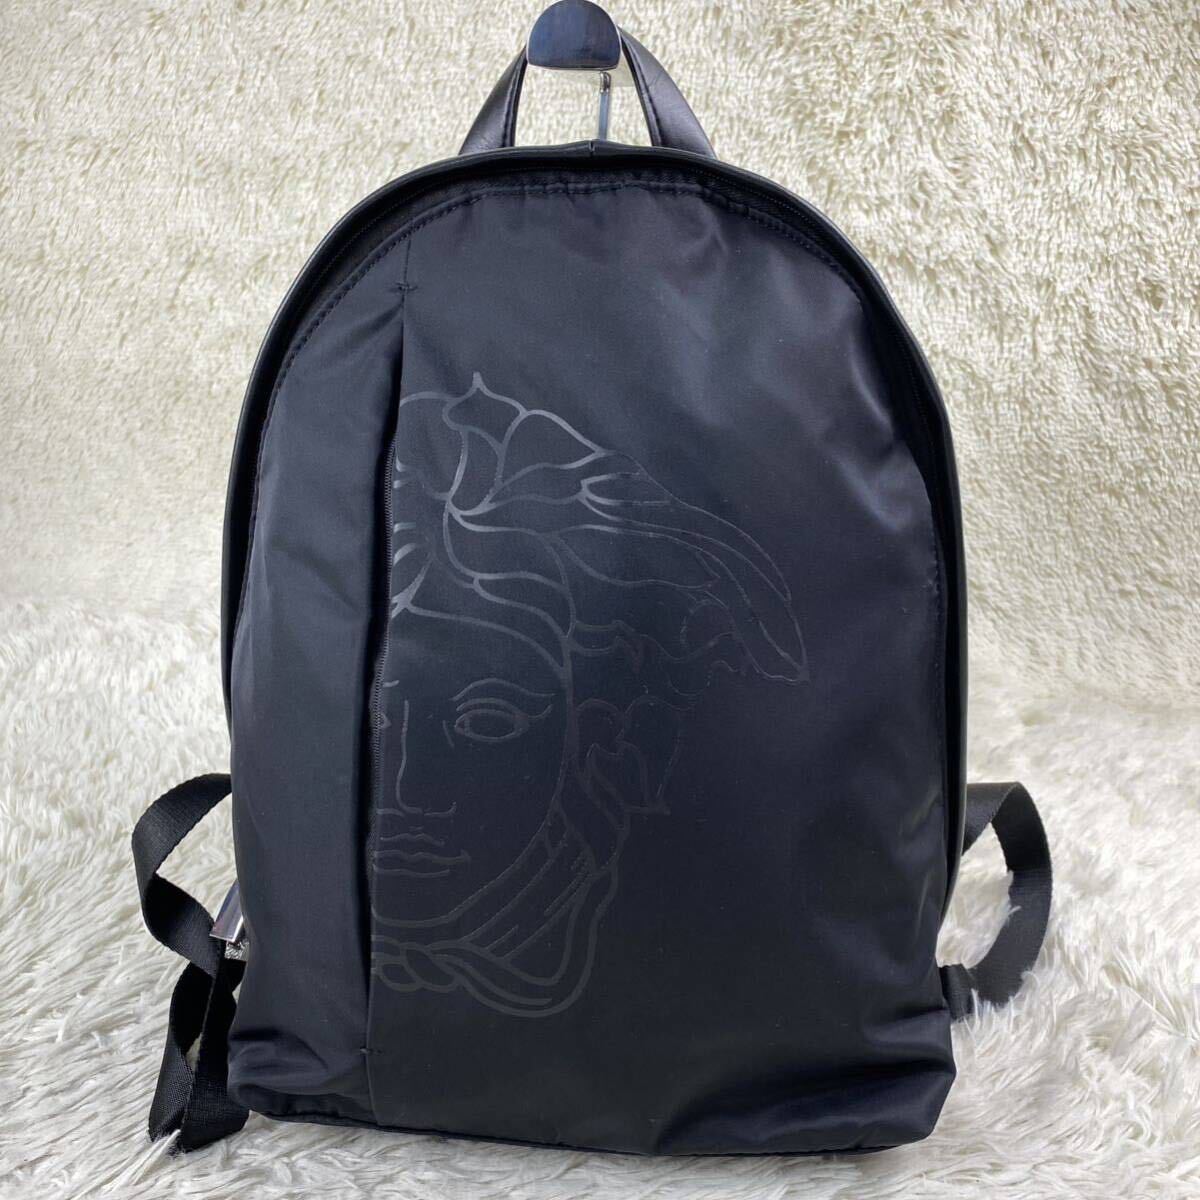  unused class 1 jpy GIANNI VERSACE Gianni Versace collection leather mete.-sa nylon rucksack backpack Day Pack black 